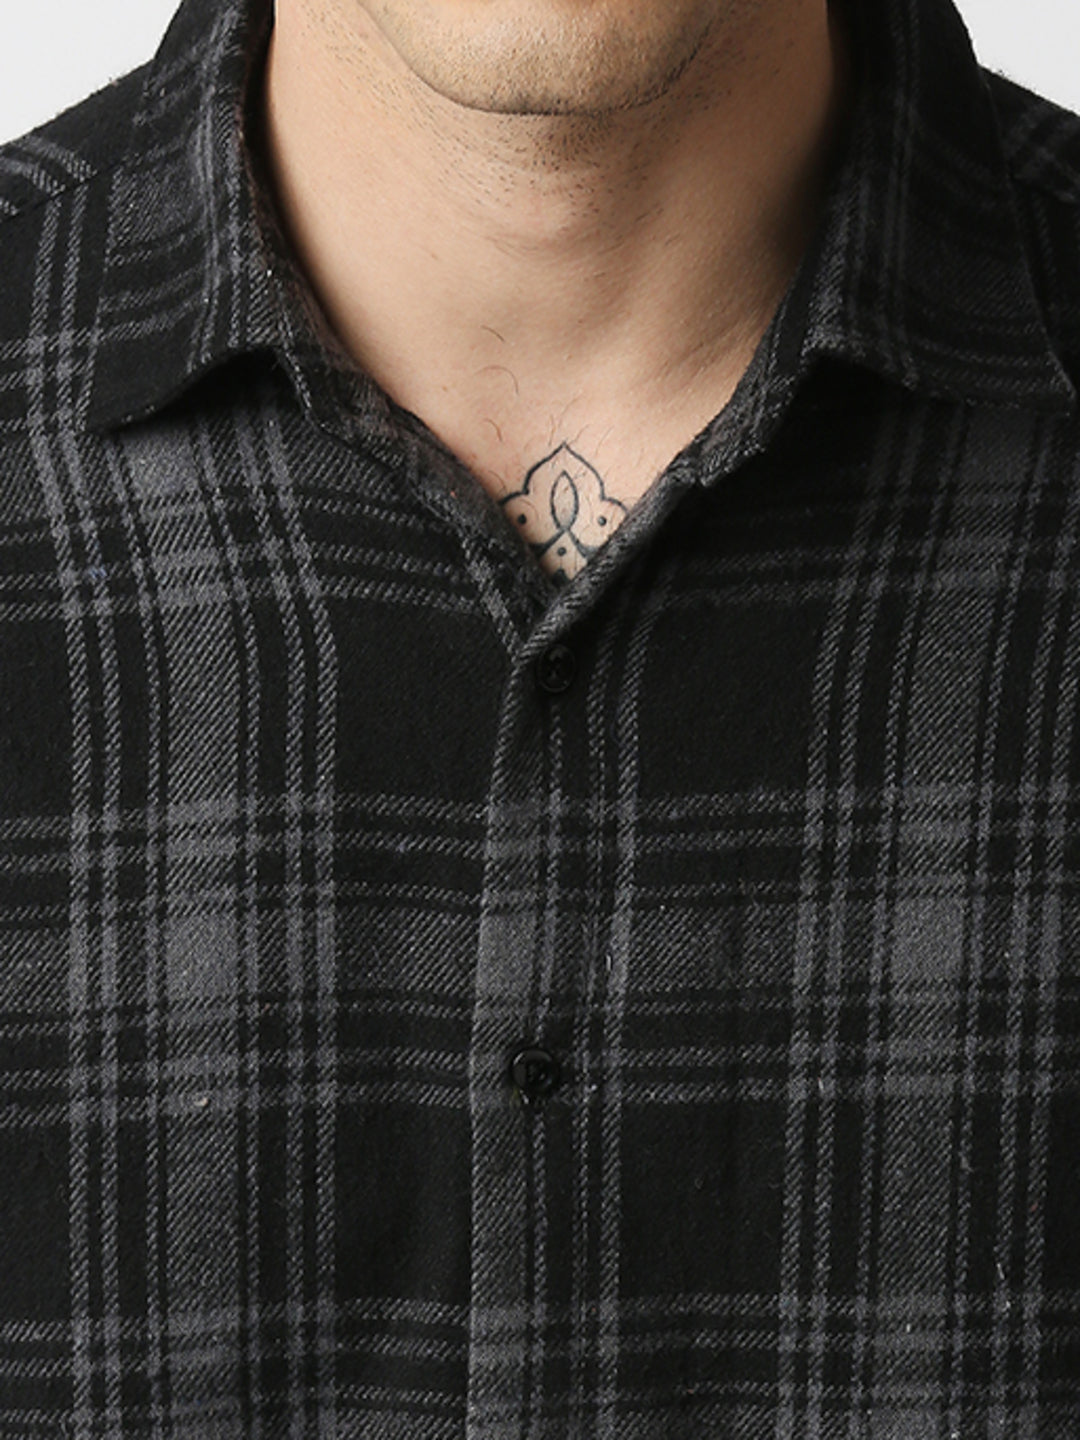 Hemsters Dark Grey Checkered Relaxed Fit Shirt